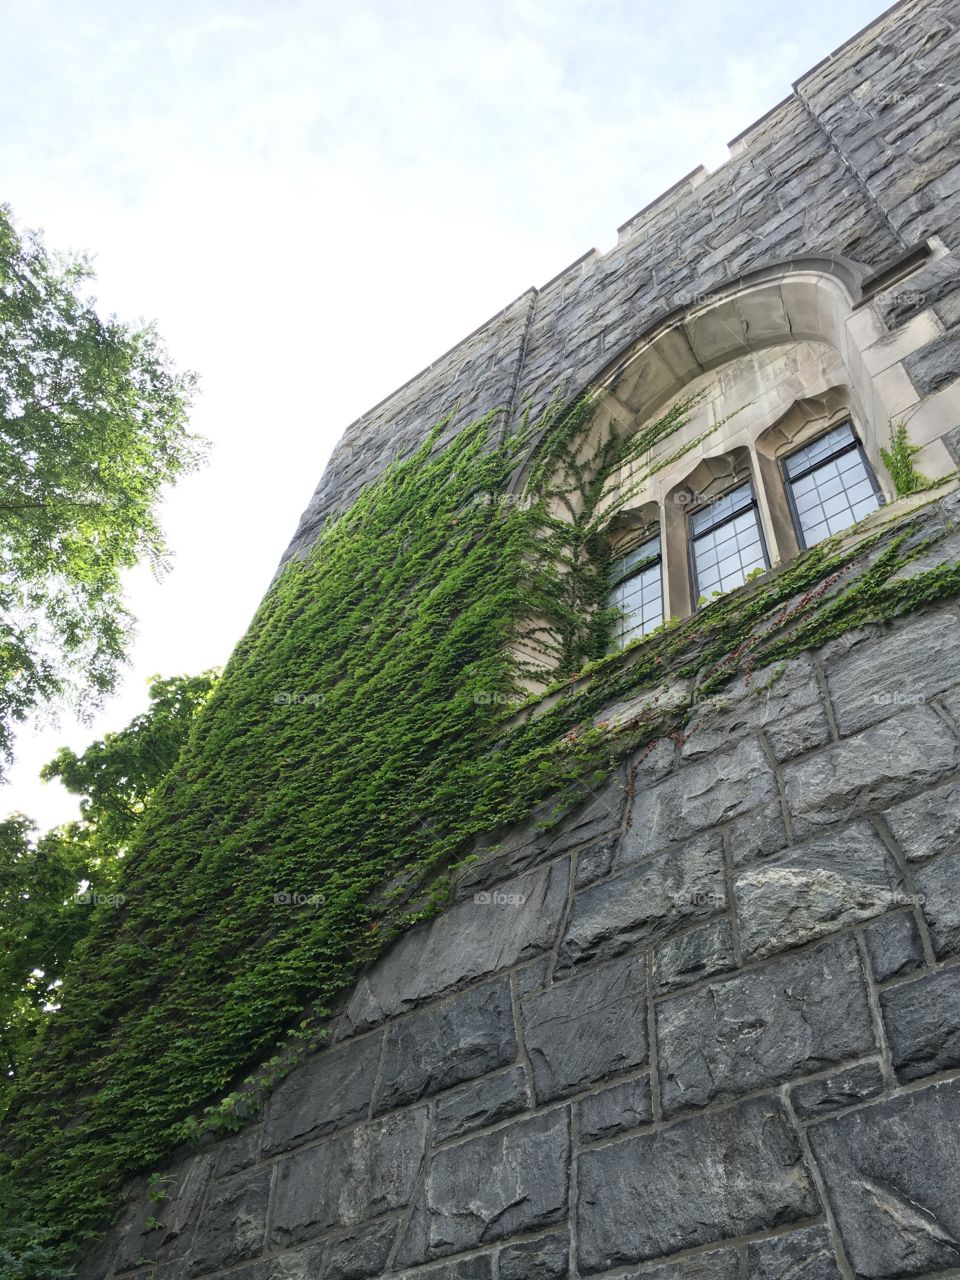 Upwards view of lush vines clinging to the exterior wall of a historic stone building with windows